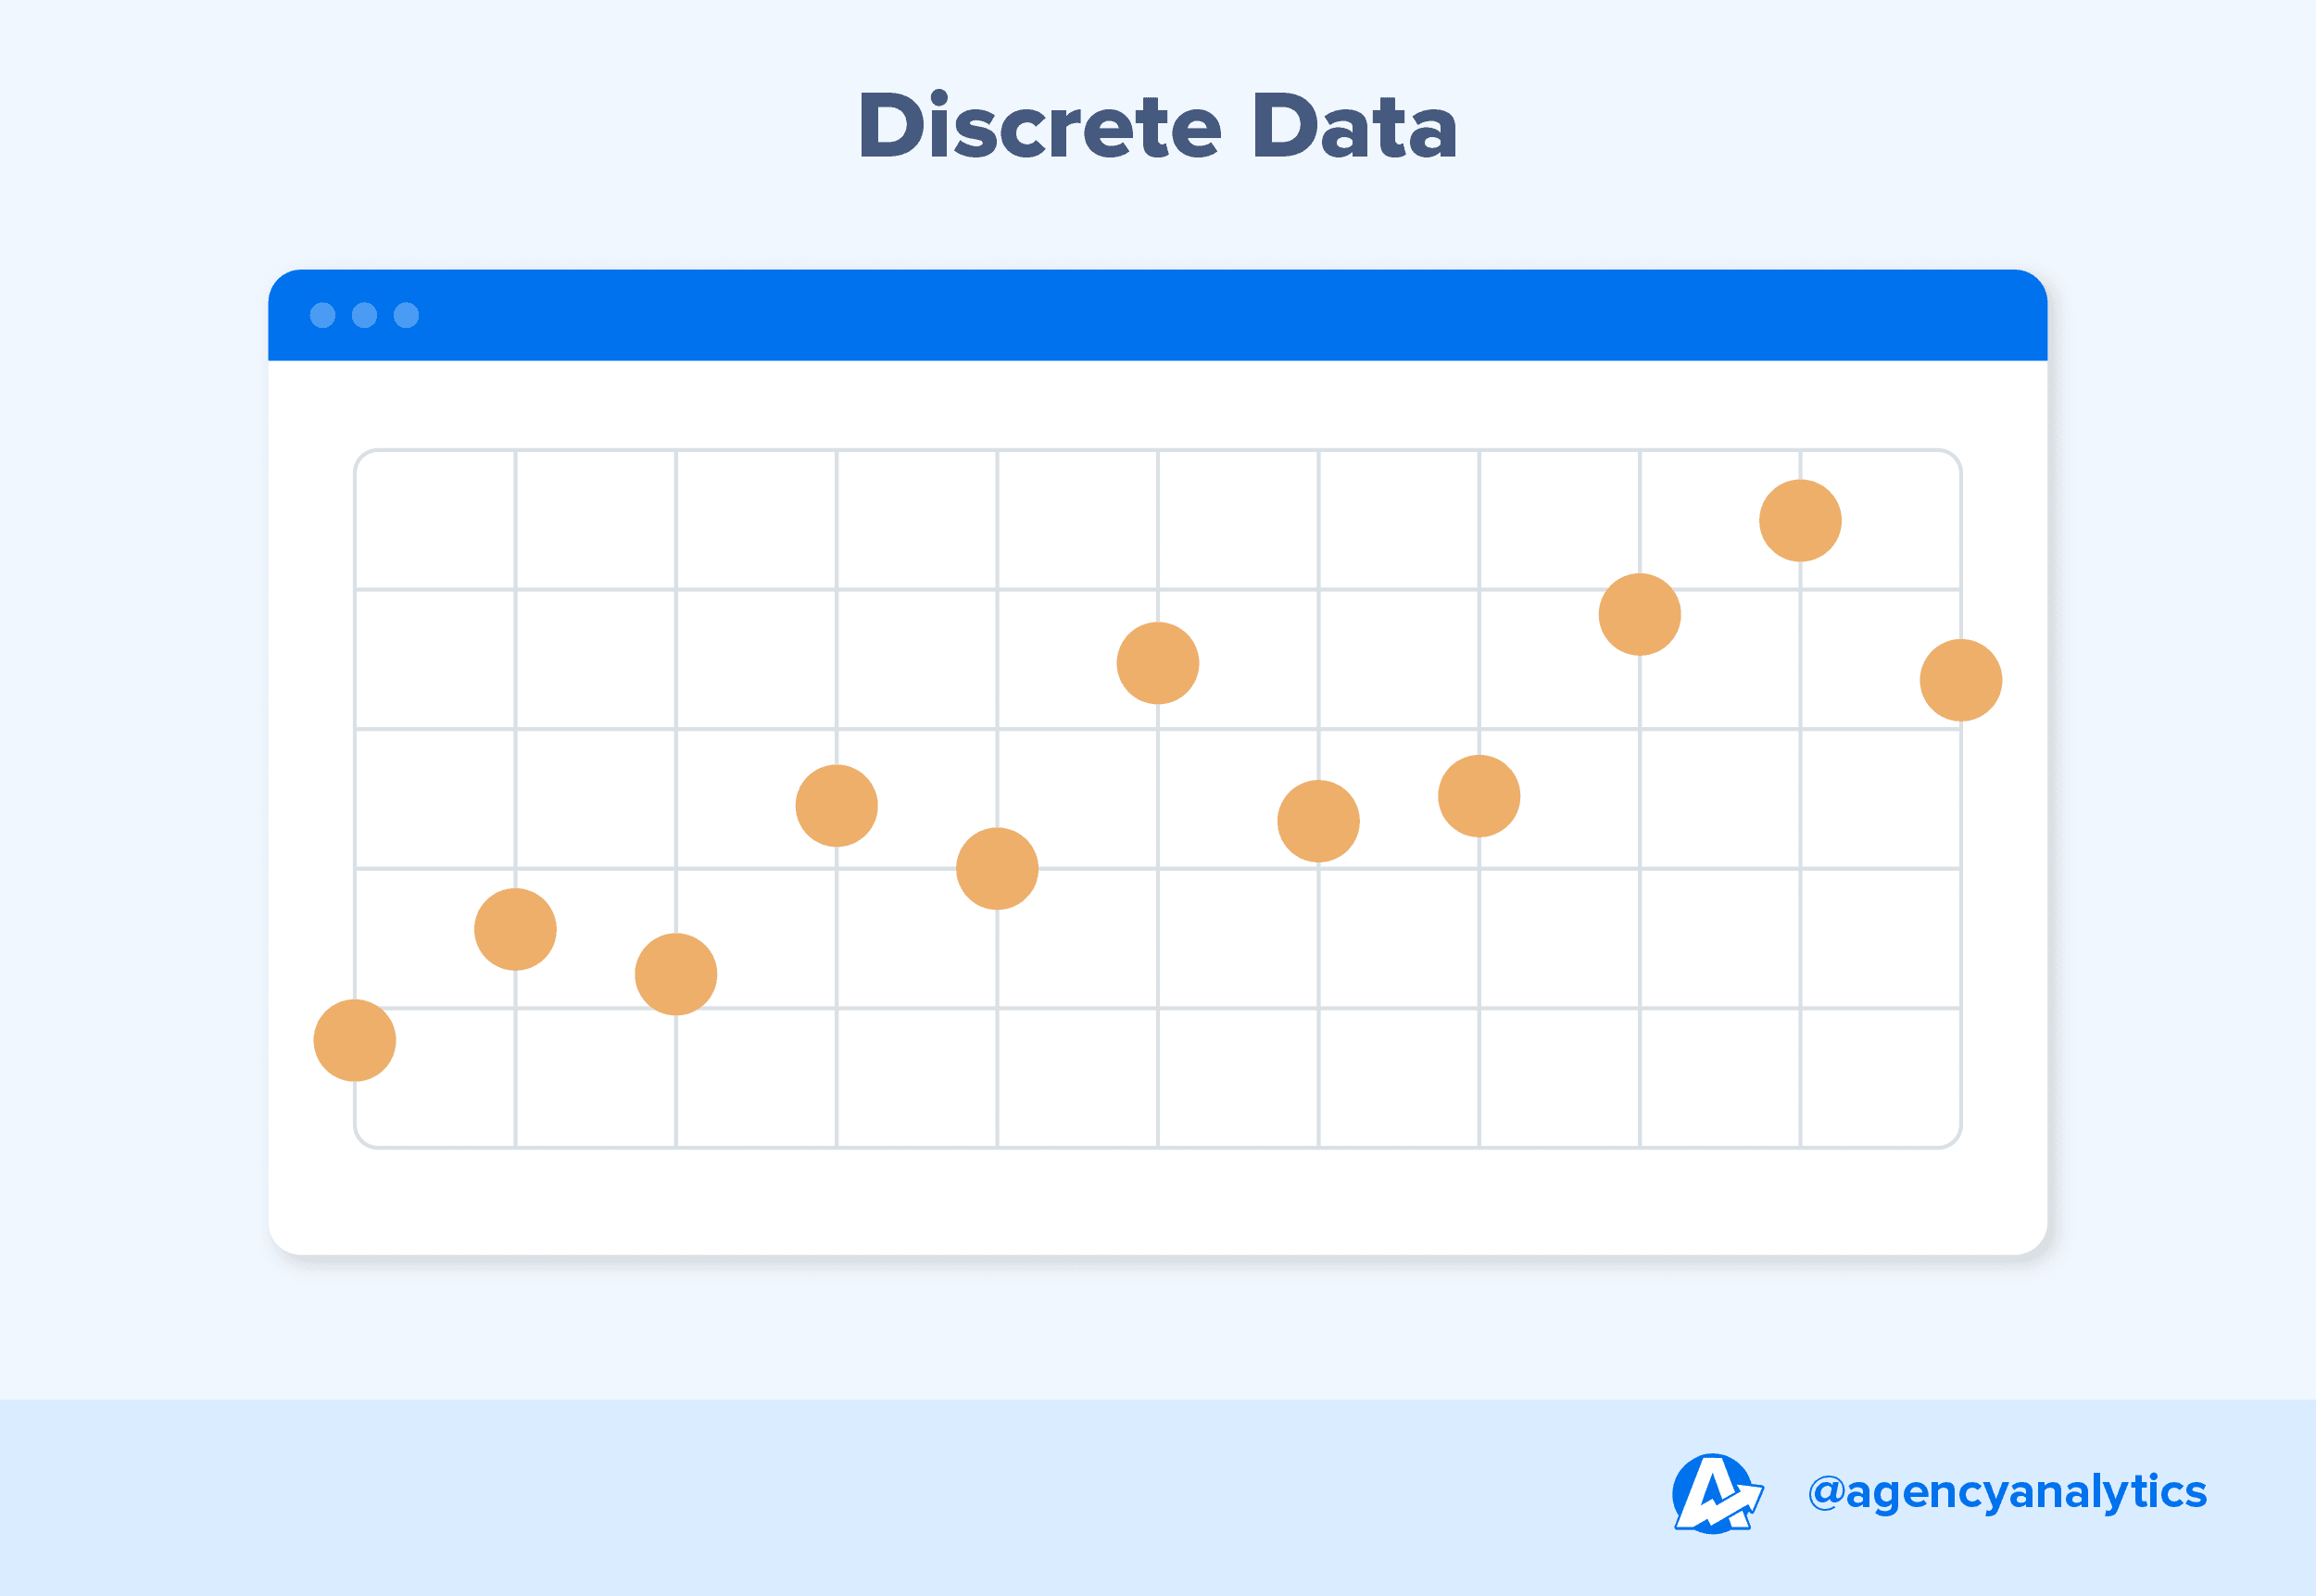 an image showing discrete data in a chart